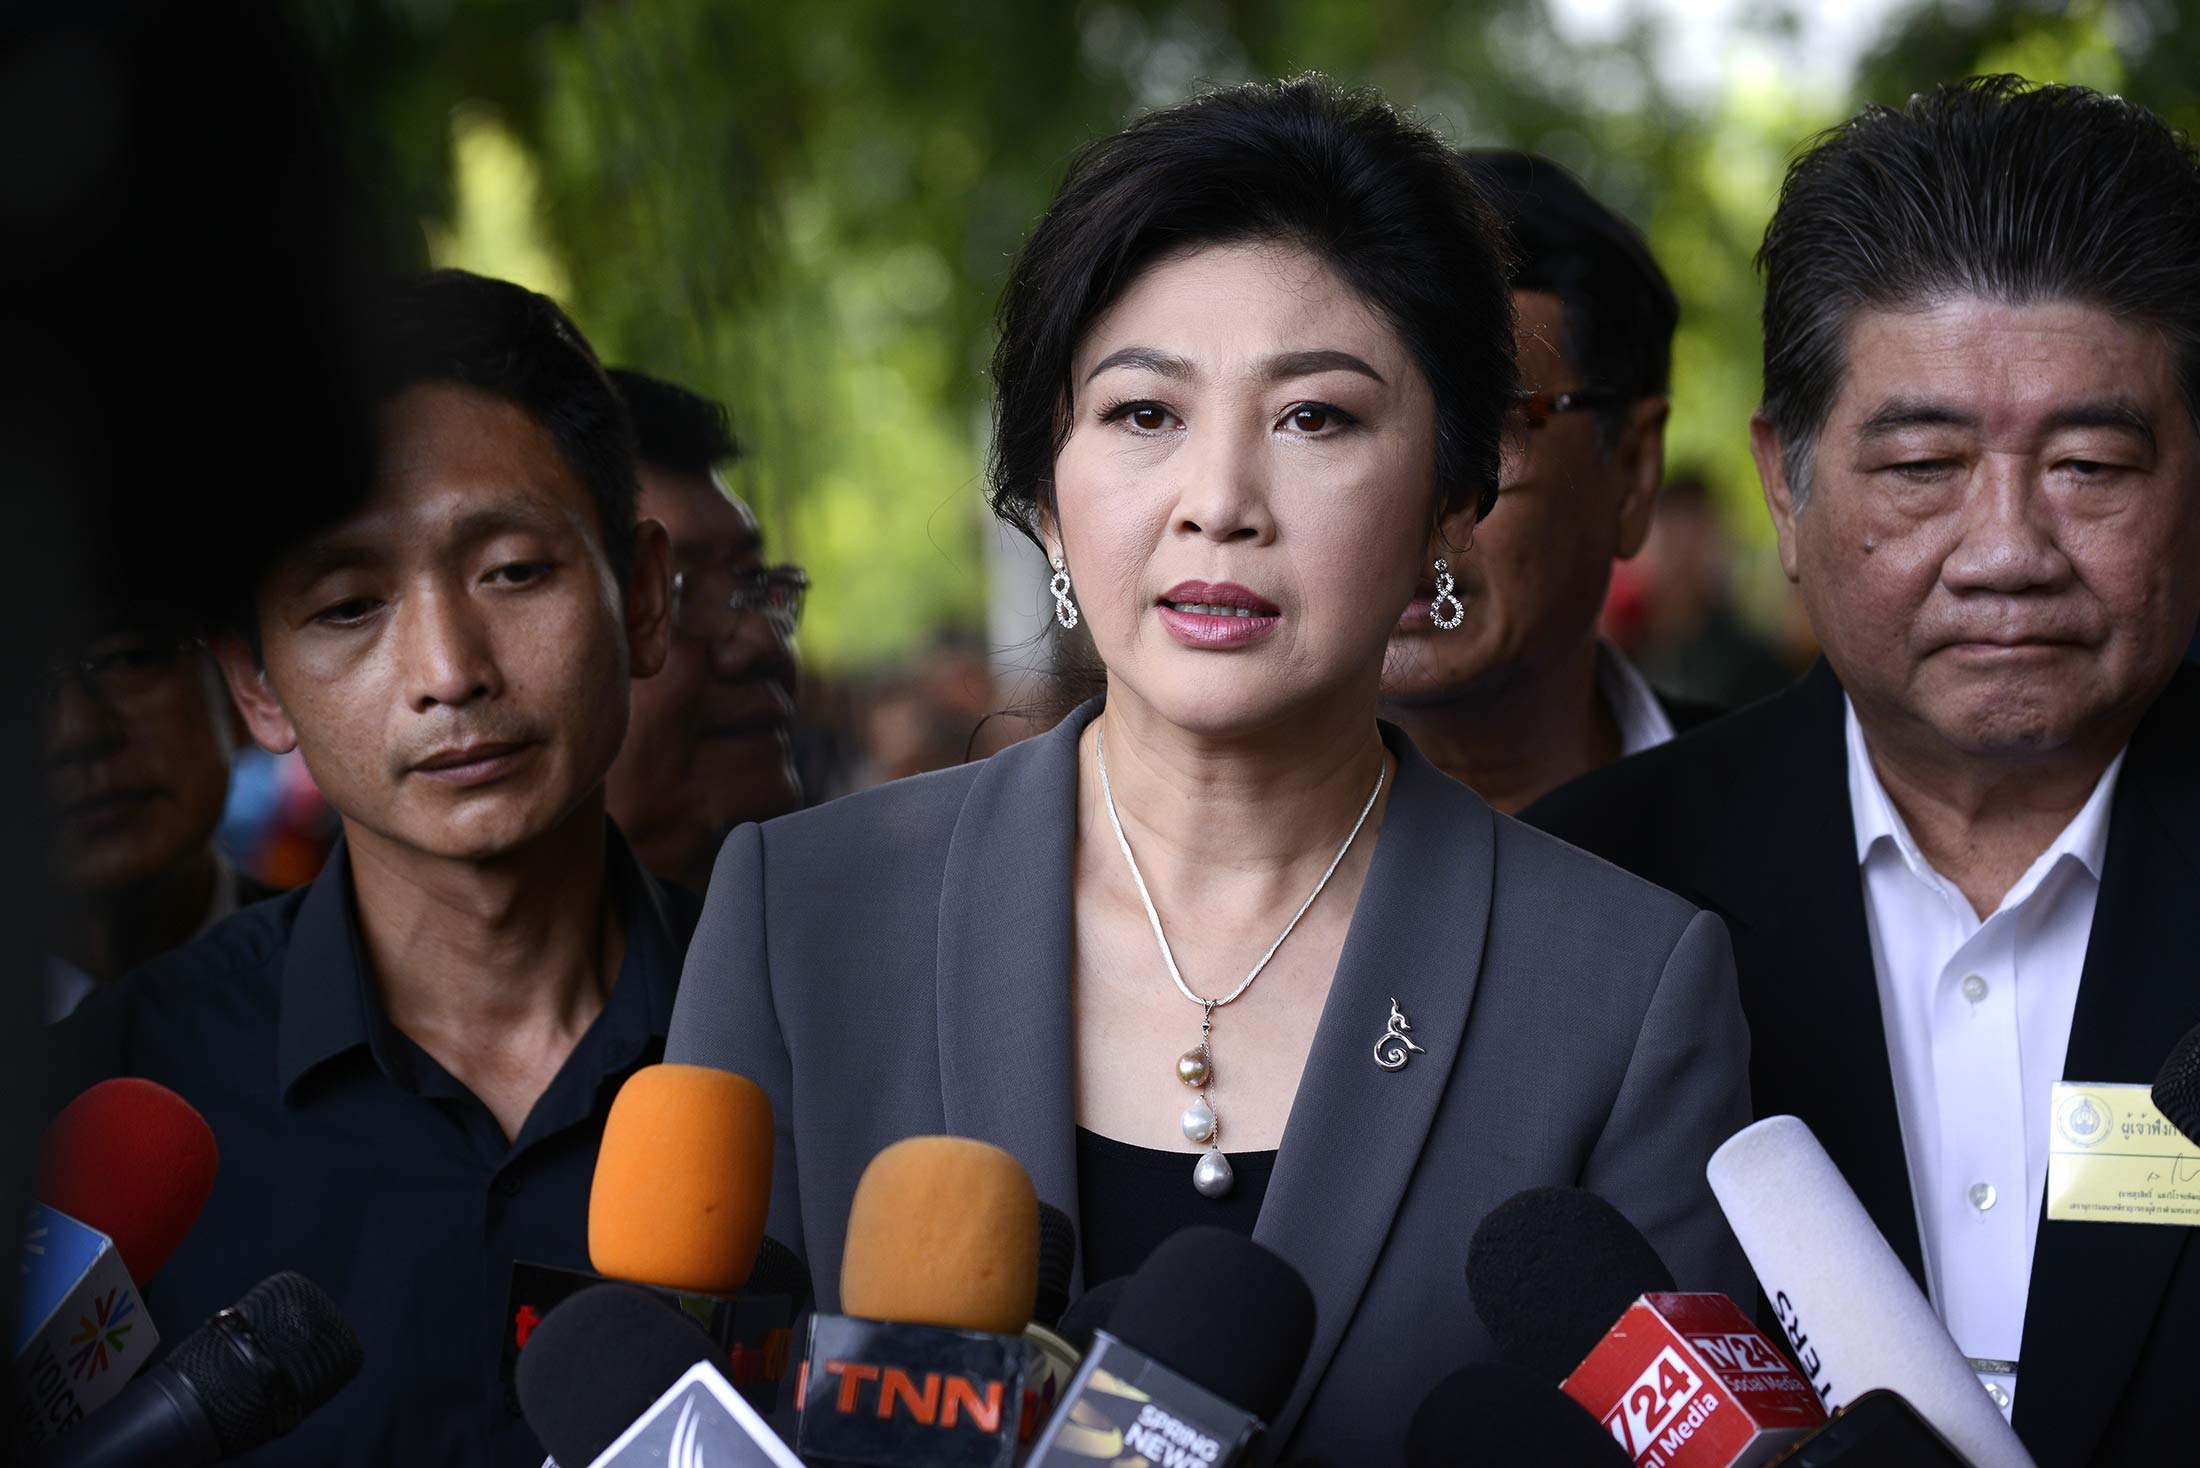 Ousted former Thai Prime Minister Yingluck Shinawatra speaks with members of Thai media as she arrives at the Supreme Court in Bangkok, Thailand on July 7, 2017.
